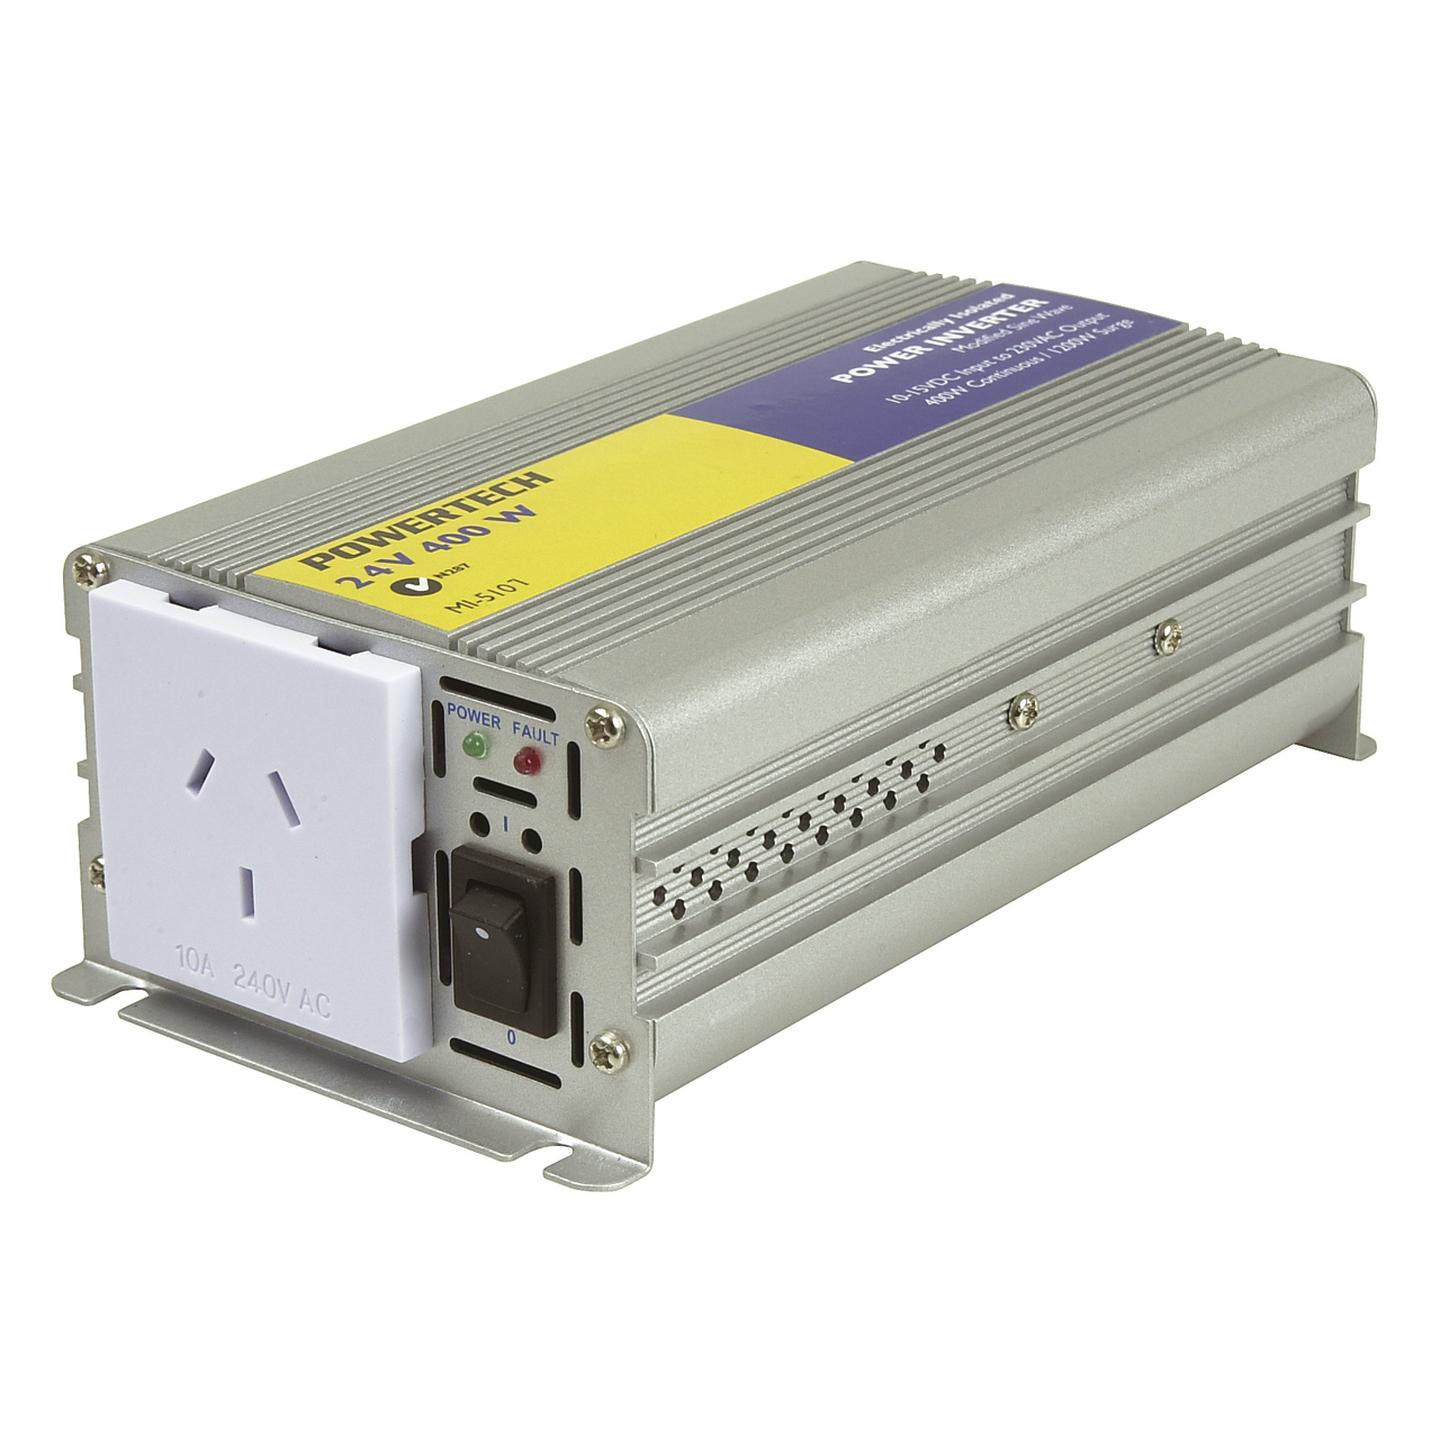 400W 1200W Surge 24VDC to 230VAC Electrically Isolated Inverter